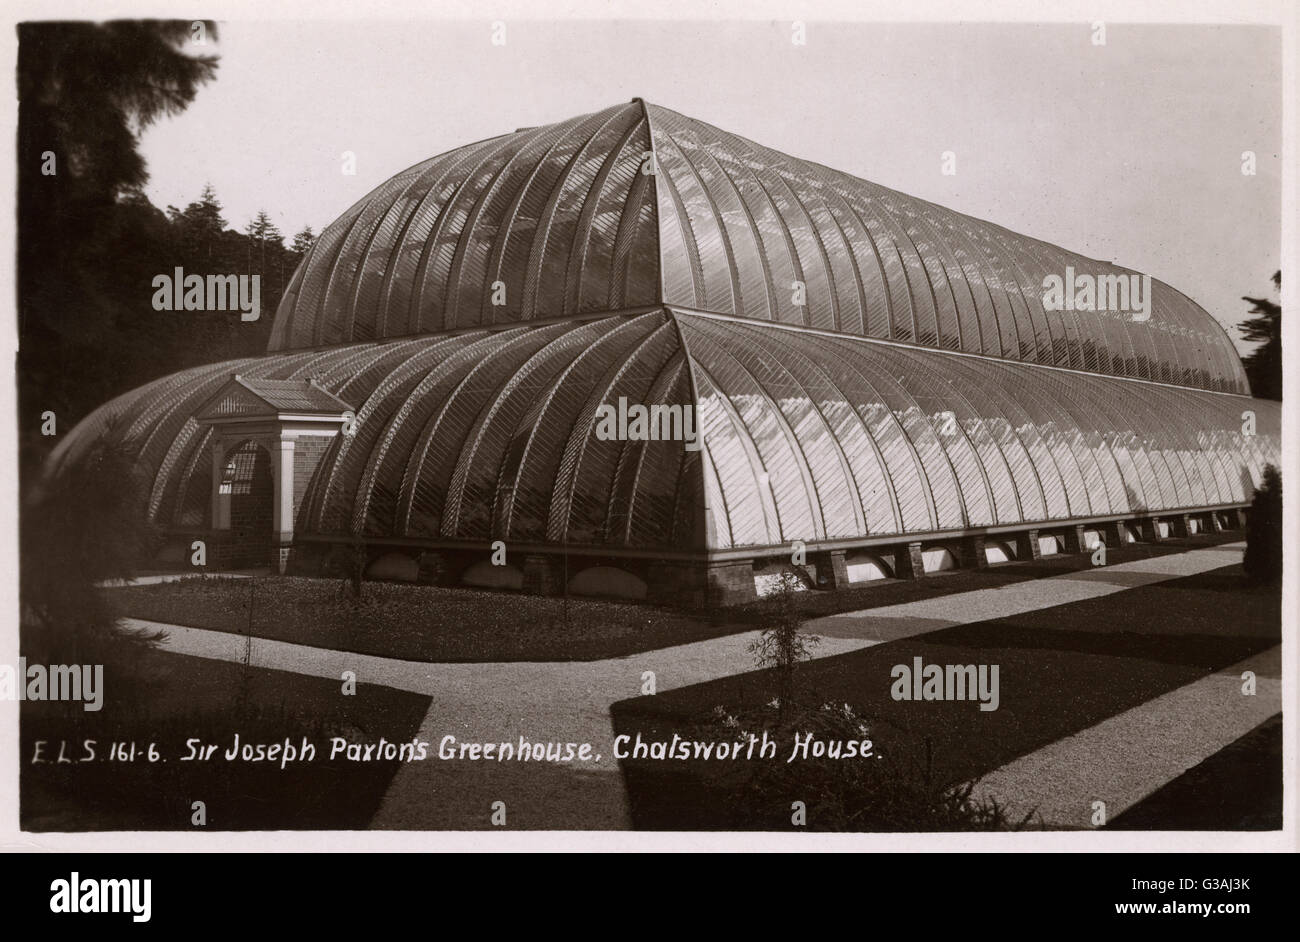 Greenhouse ('The Great Conservatory') of 1837 by Sir Joseph Paxton at Chatsworth House, Derbyshire - demolished in 1920.     Date: circa 1910s Stock Photo